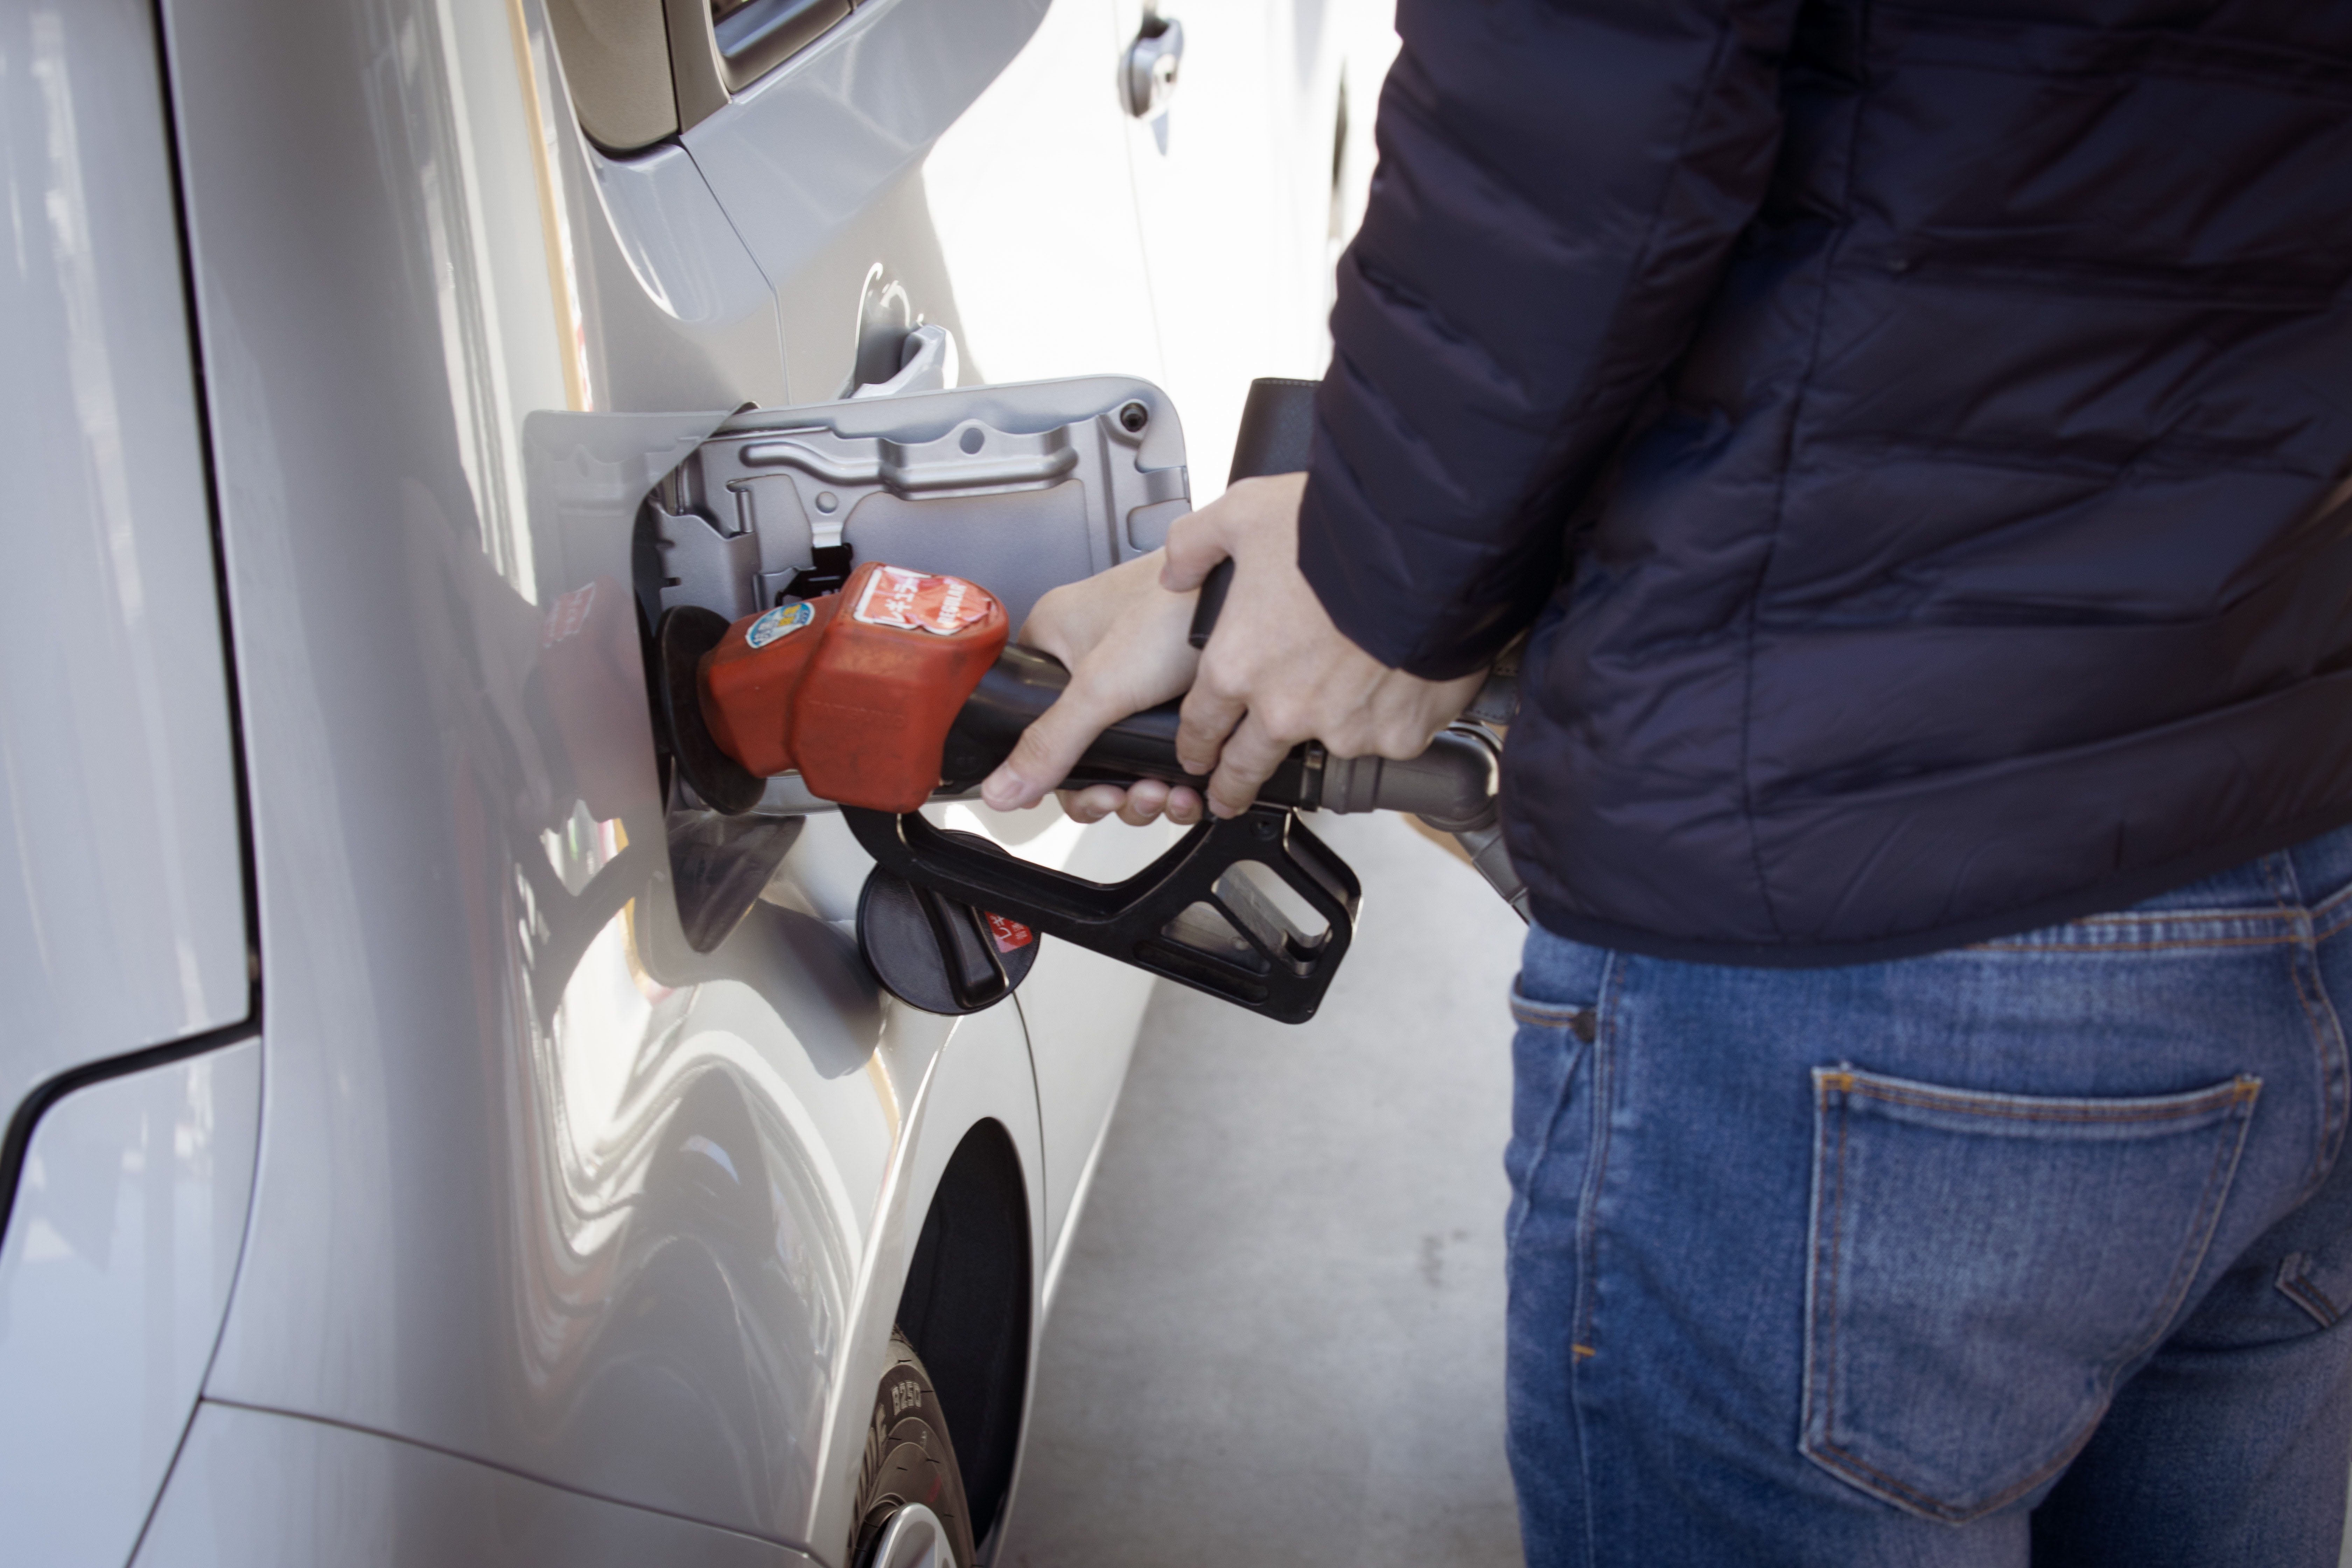 A person filling their internal combustion engine vehicle with carbon-emitting fossil fuels.